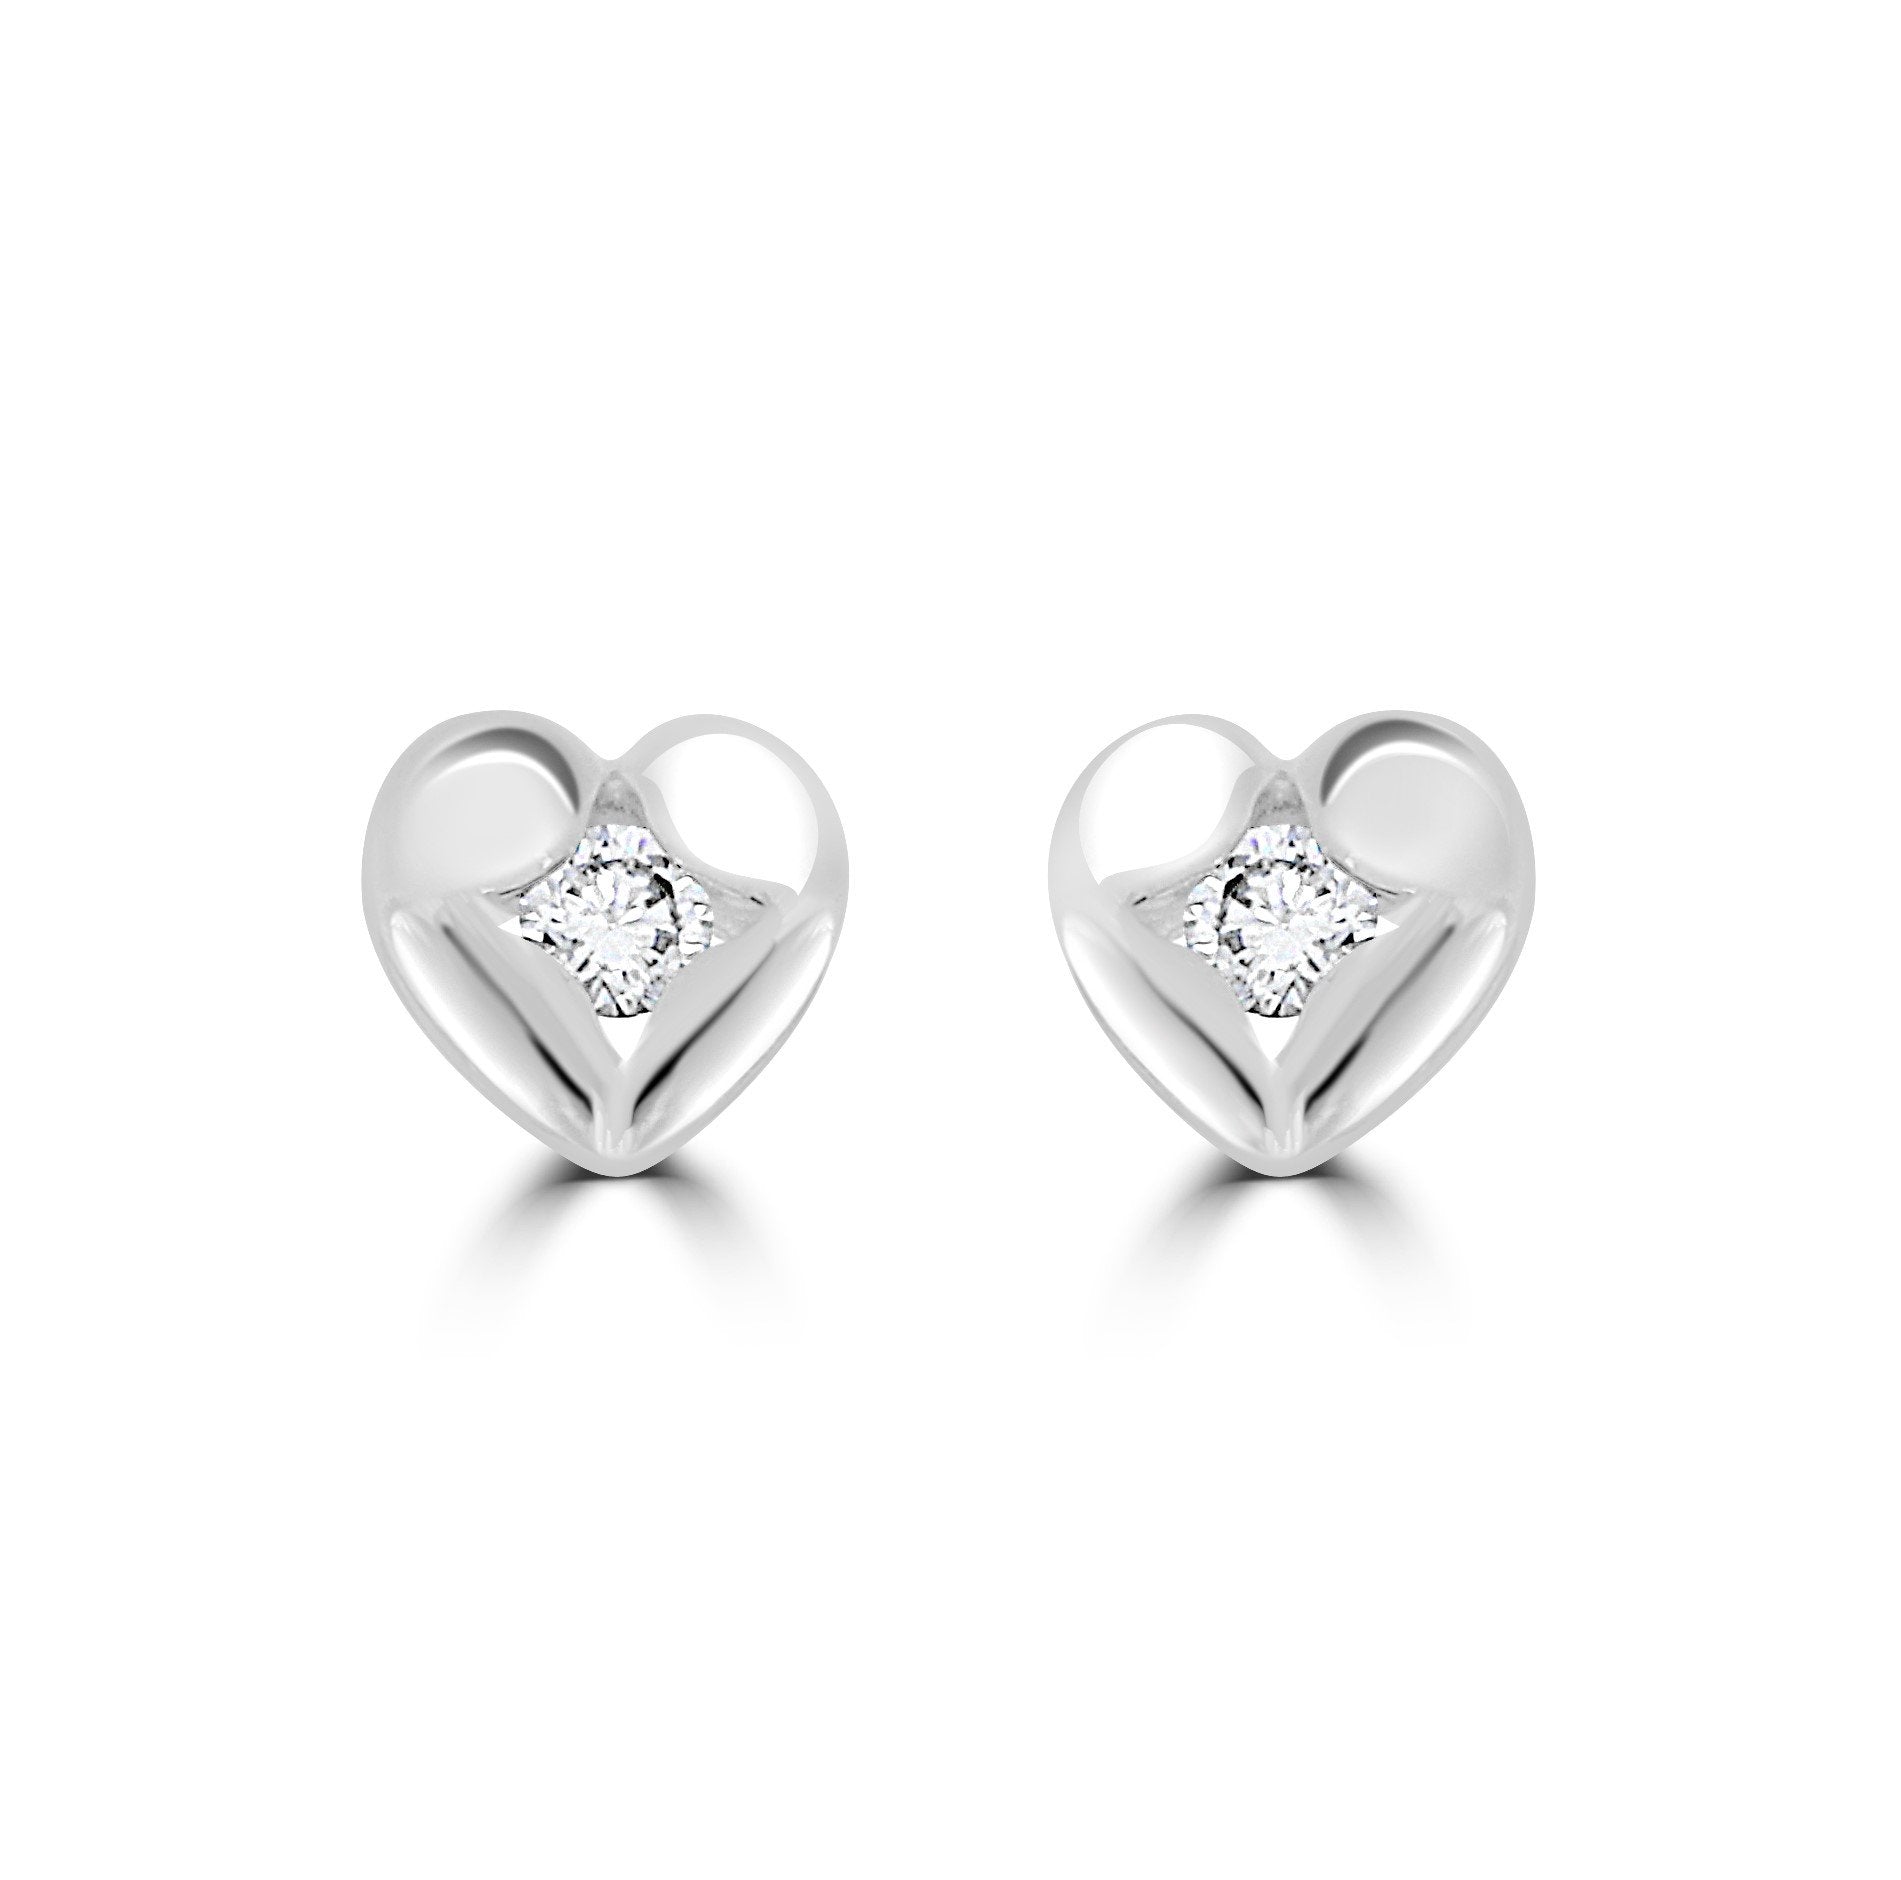 Sterling Silver and CZ Heart Earrings Stud